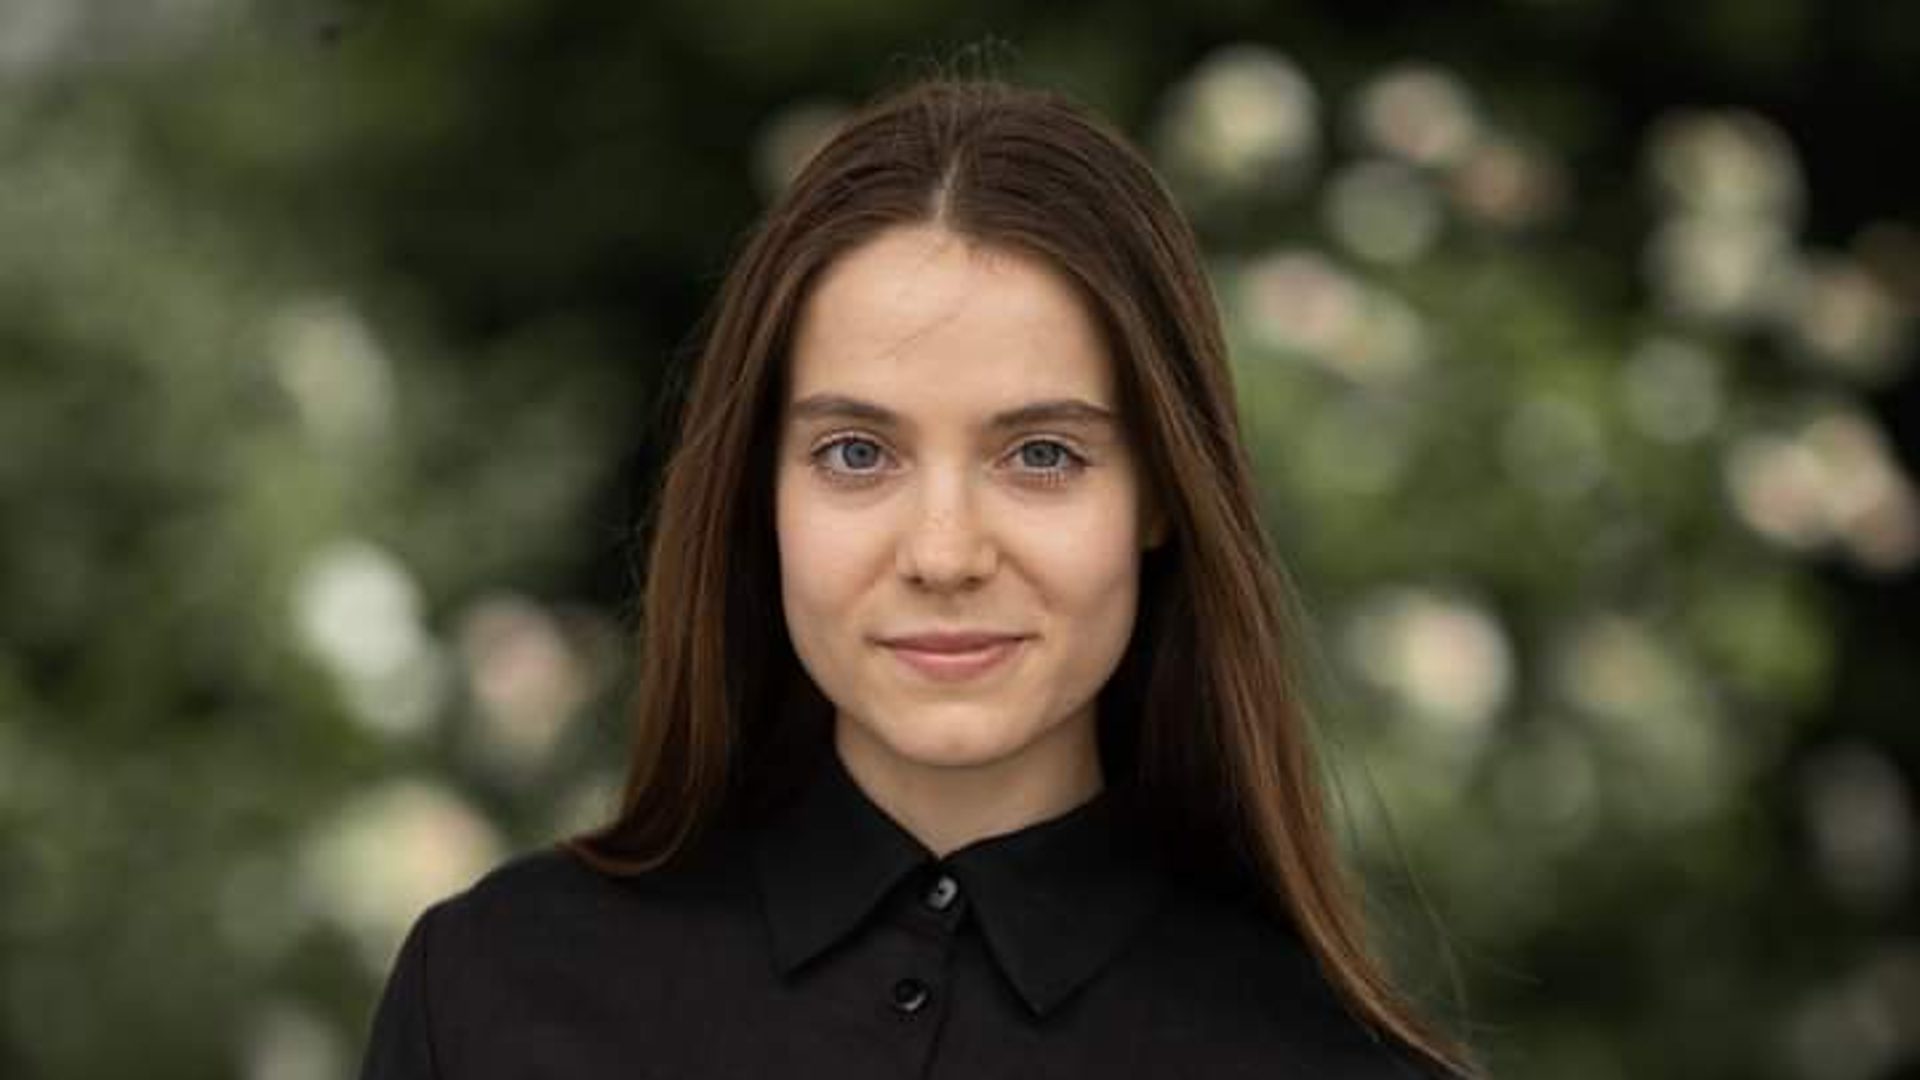 SFL alumna from Russia, Dr. Vera Kichanova, successfully defended her dissertation to get her Ph.D. in Political Economy at King’s College London. 